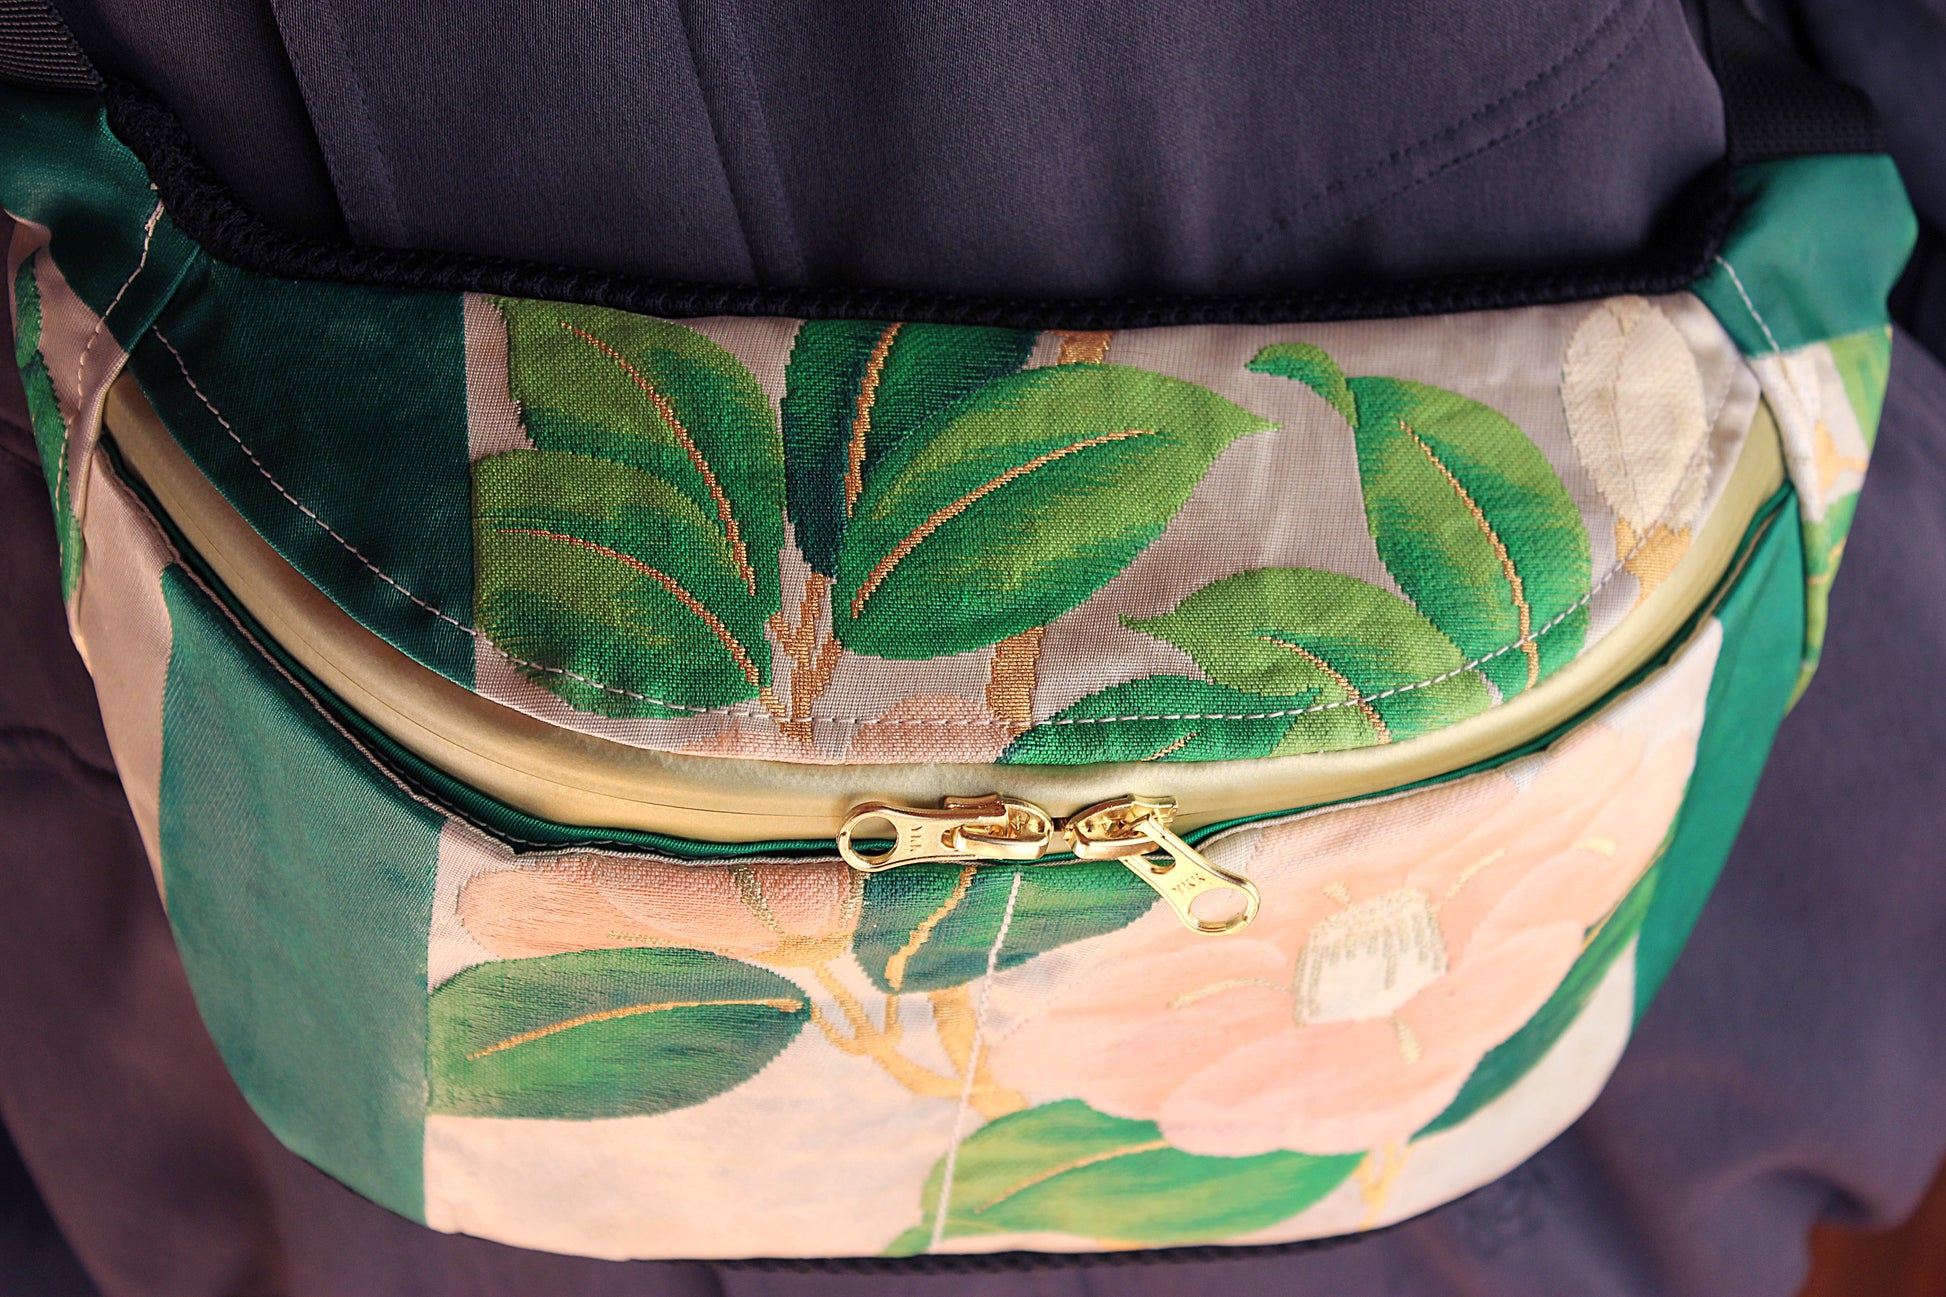 Camellia bum bag handcrafted in Japan from antique silk kimonos